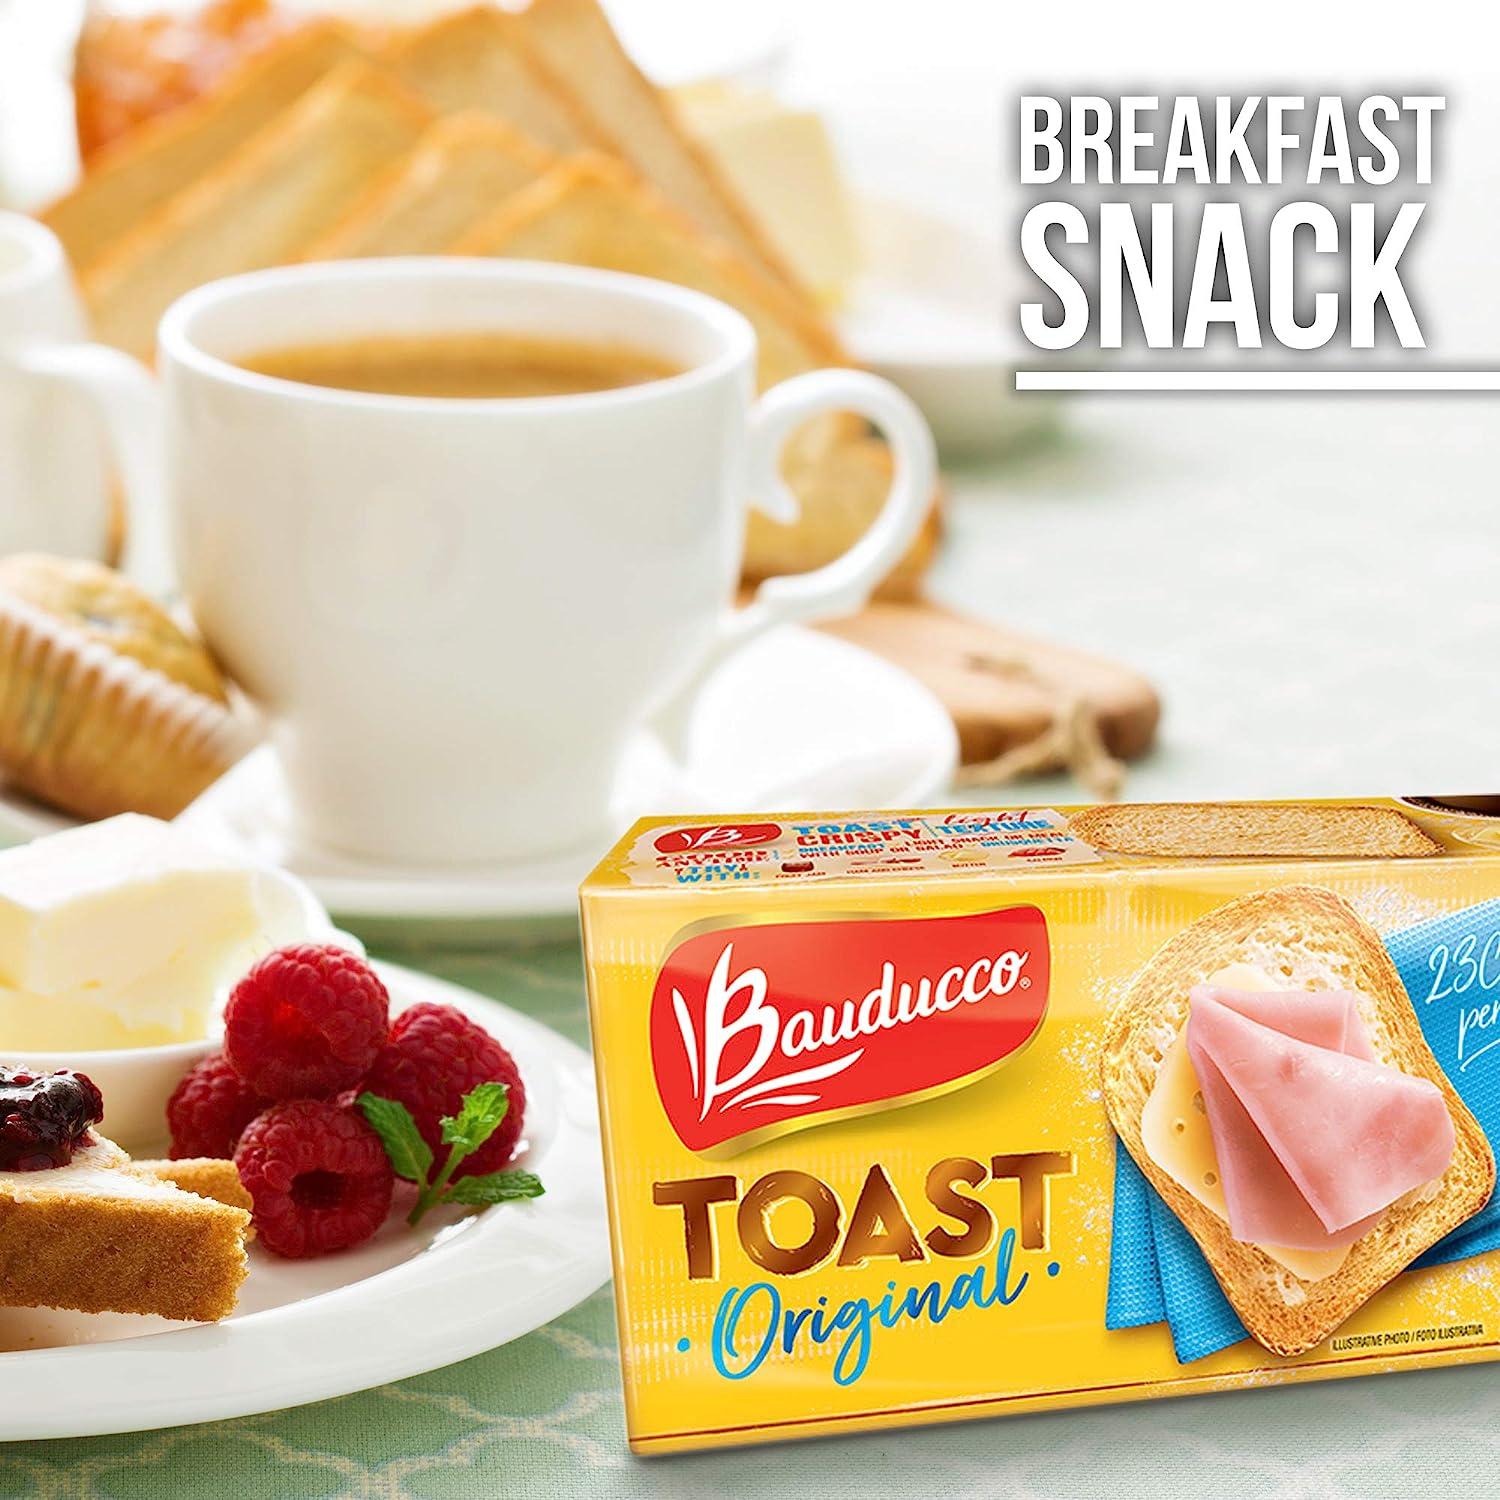 Bauducco Toast - Delicious, Light & Crispy Toasted Bread - Original & Whole  Wheat - Ready-to-Eat Breakfast Toast & Sandwich Bread - No Artificial  Flavors - 30.0 oz (Pack of 6)